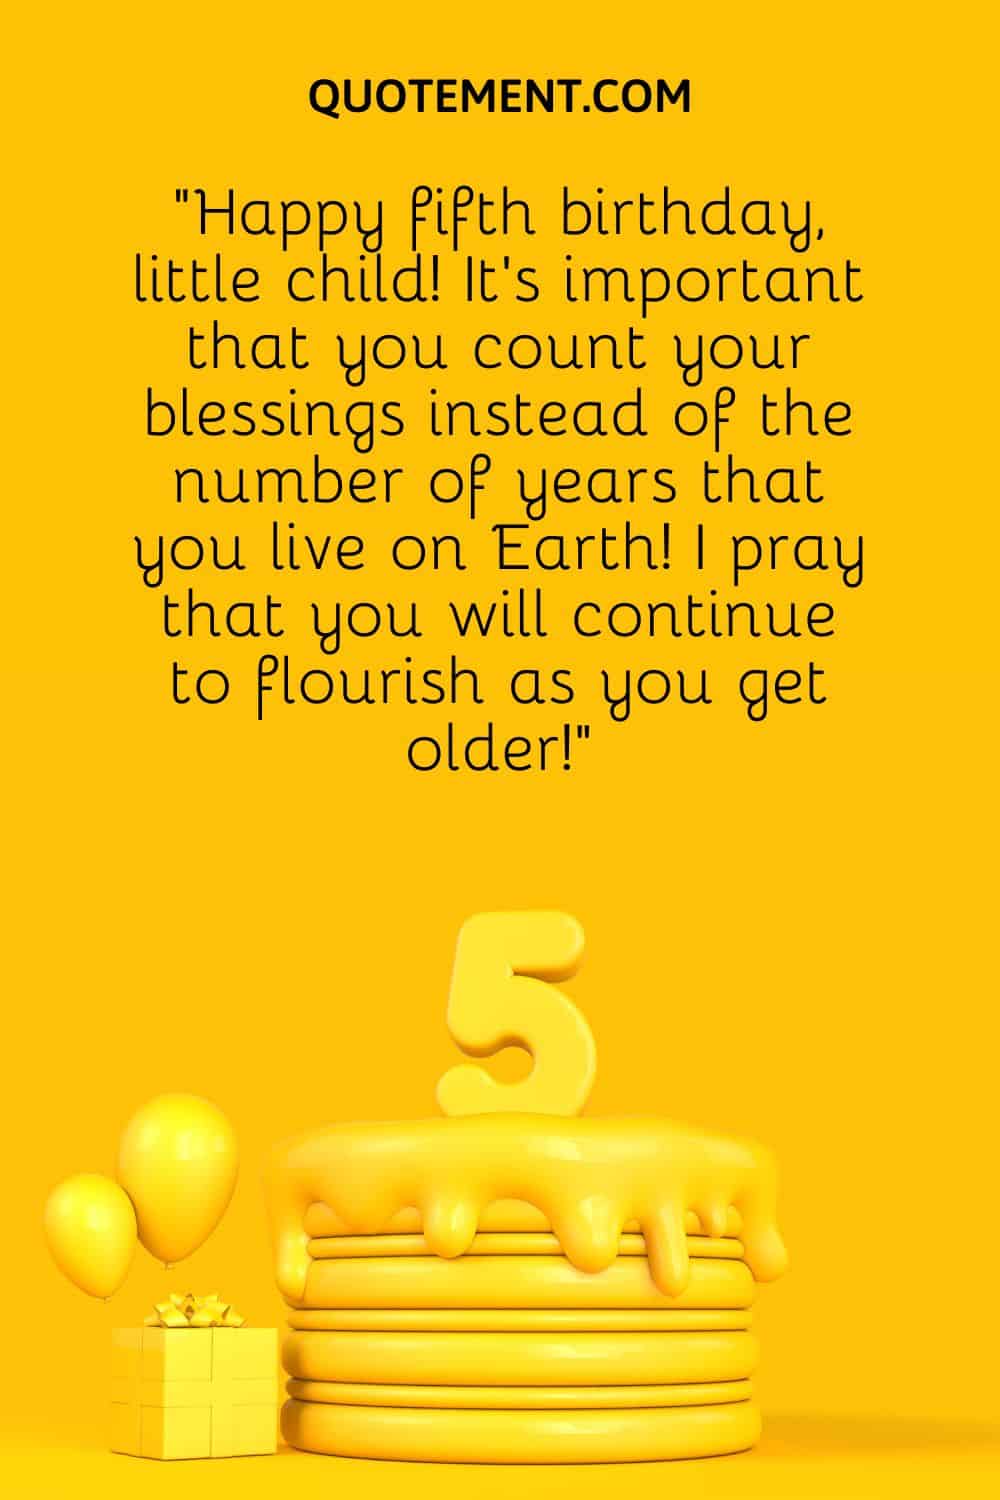 “Happy fifth birthday, little child! It’s important that you count your blessings instead of the number of years that you live on Earth! I pray that you will continue to flourish as you get older!”